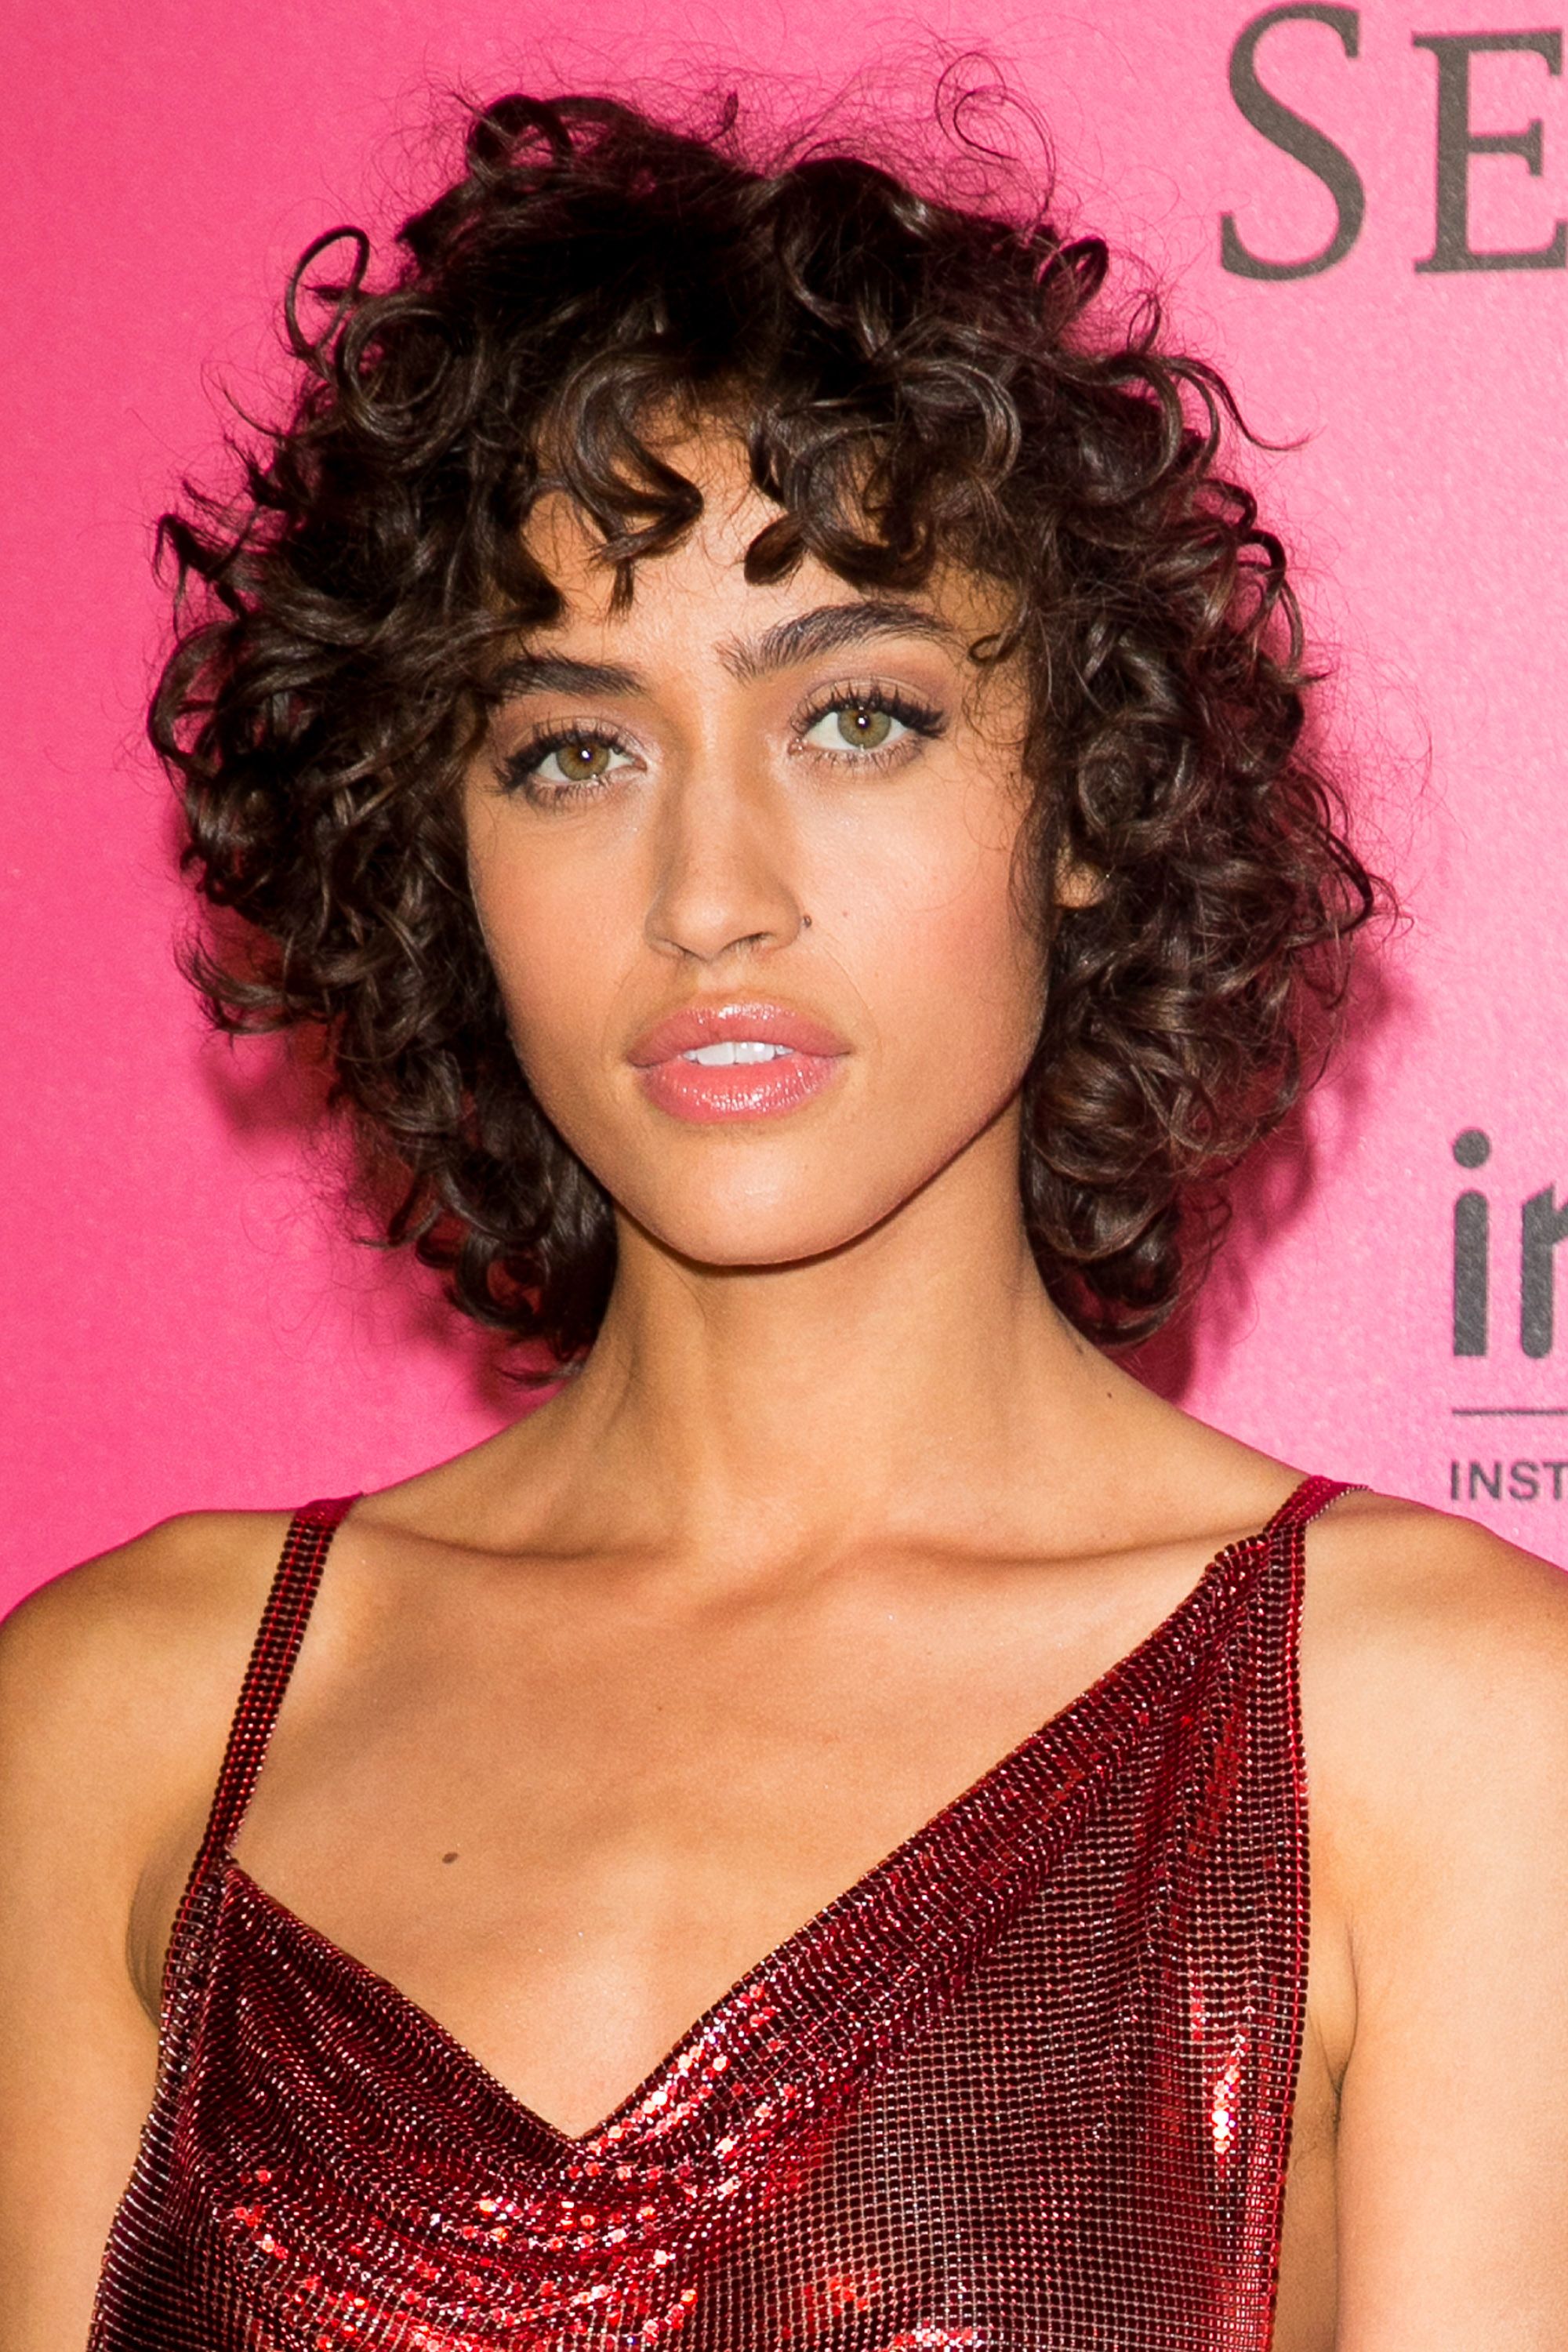 Naturally Curly Short Hairstyles, Type 3A hair can be defined with looser  curls that are flatter and frizz.